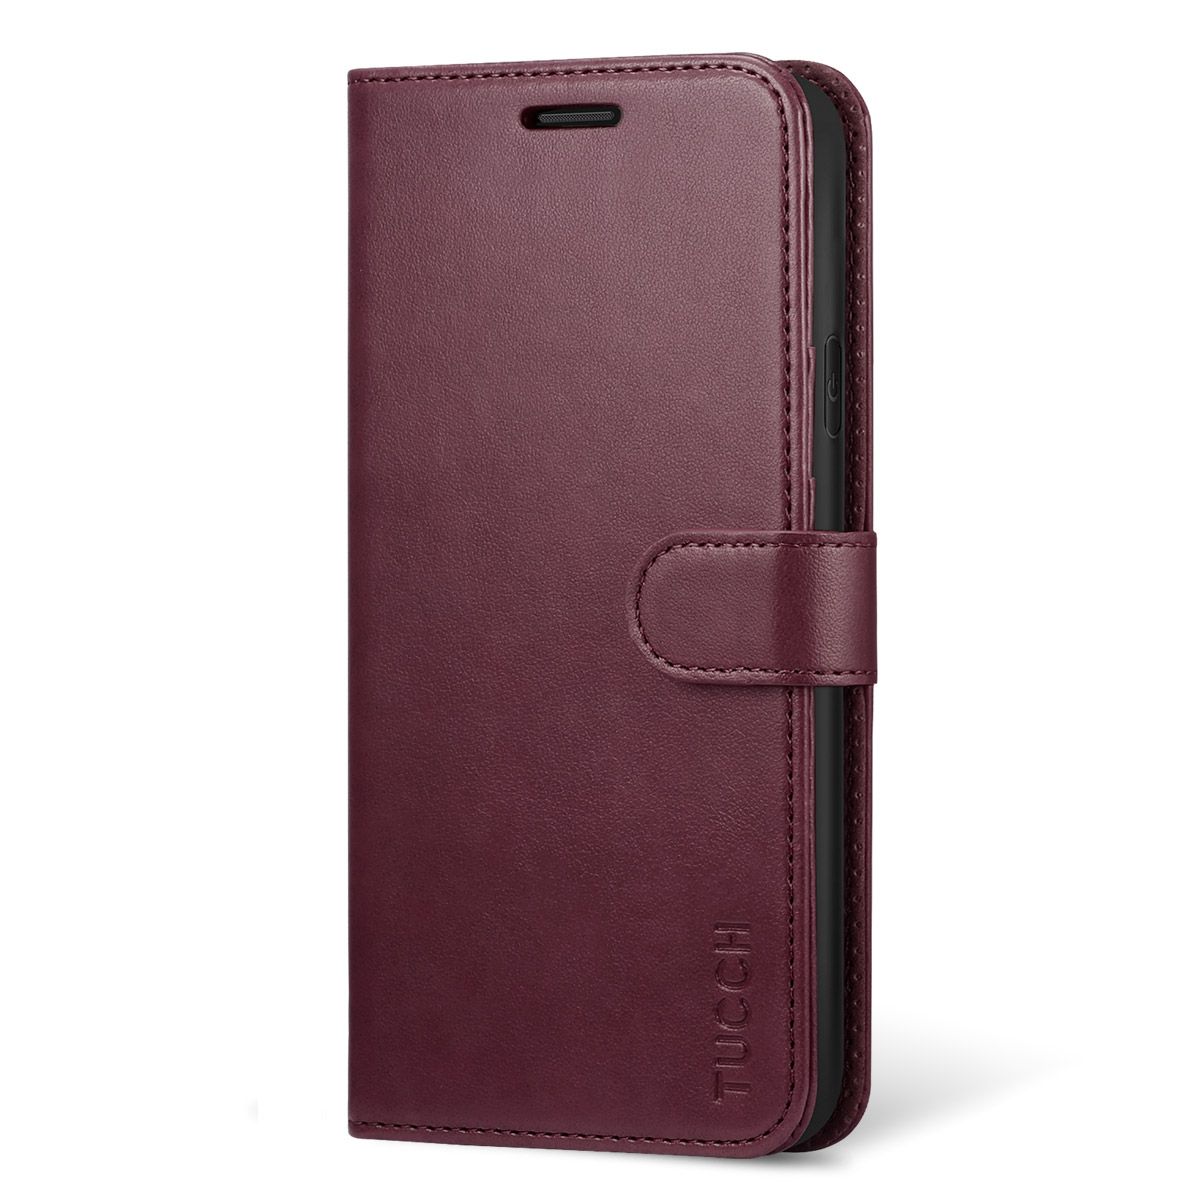 TUCCH iPhone XR Wallet Case - iPhone 10R Leather Case Cover with Stand,  Flip Style, Magnetic Closure, RFID Blocking, Support Wireless Charging -  Wine Red